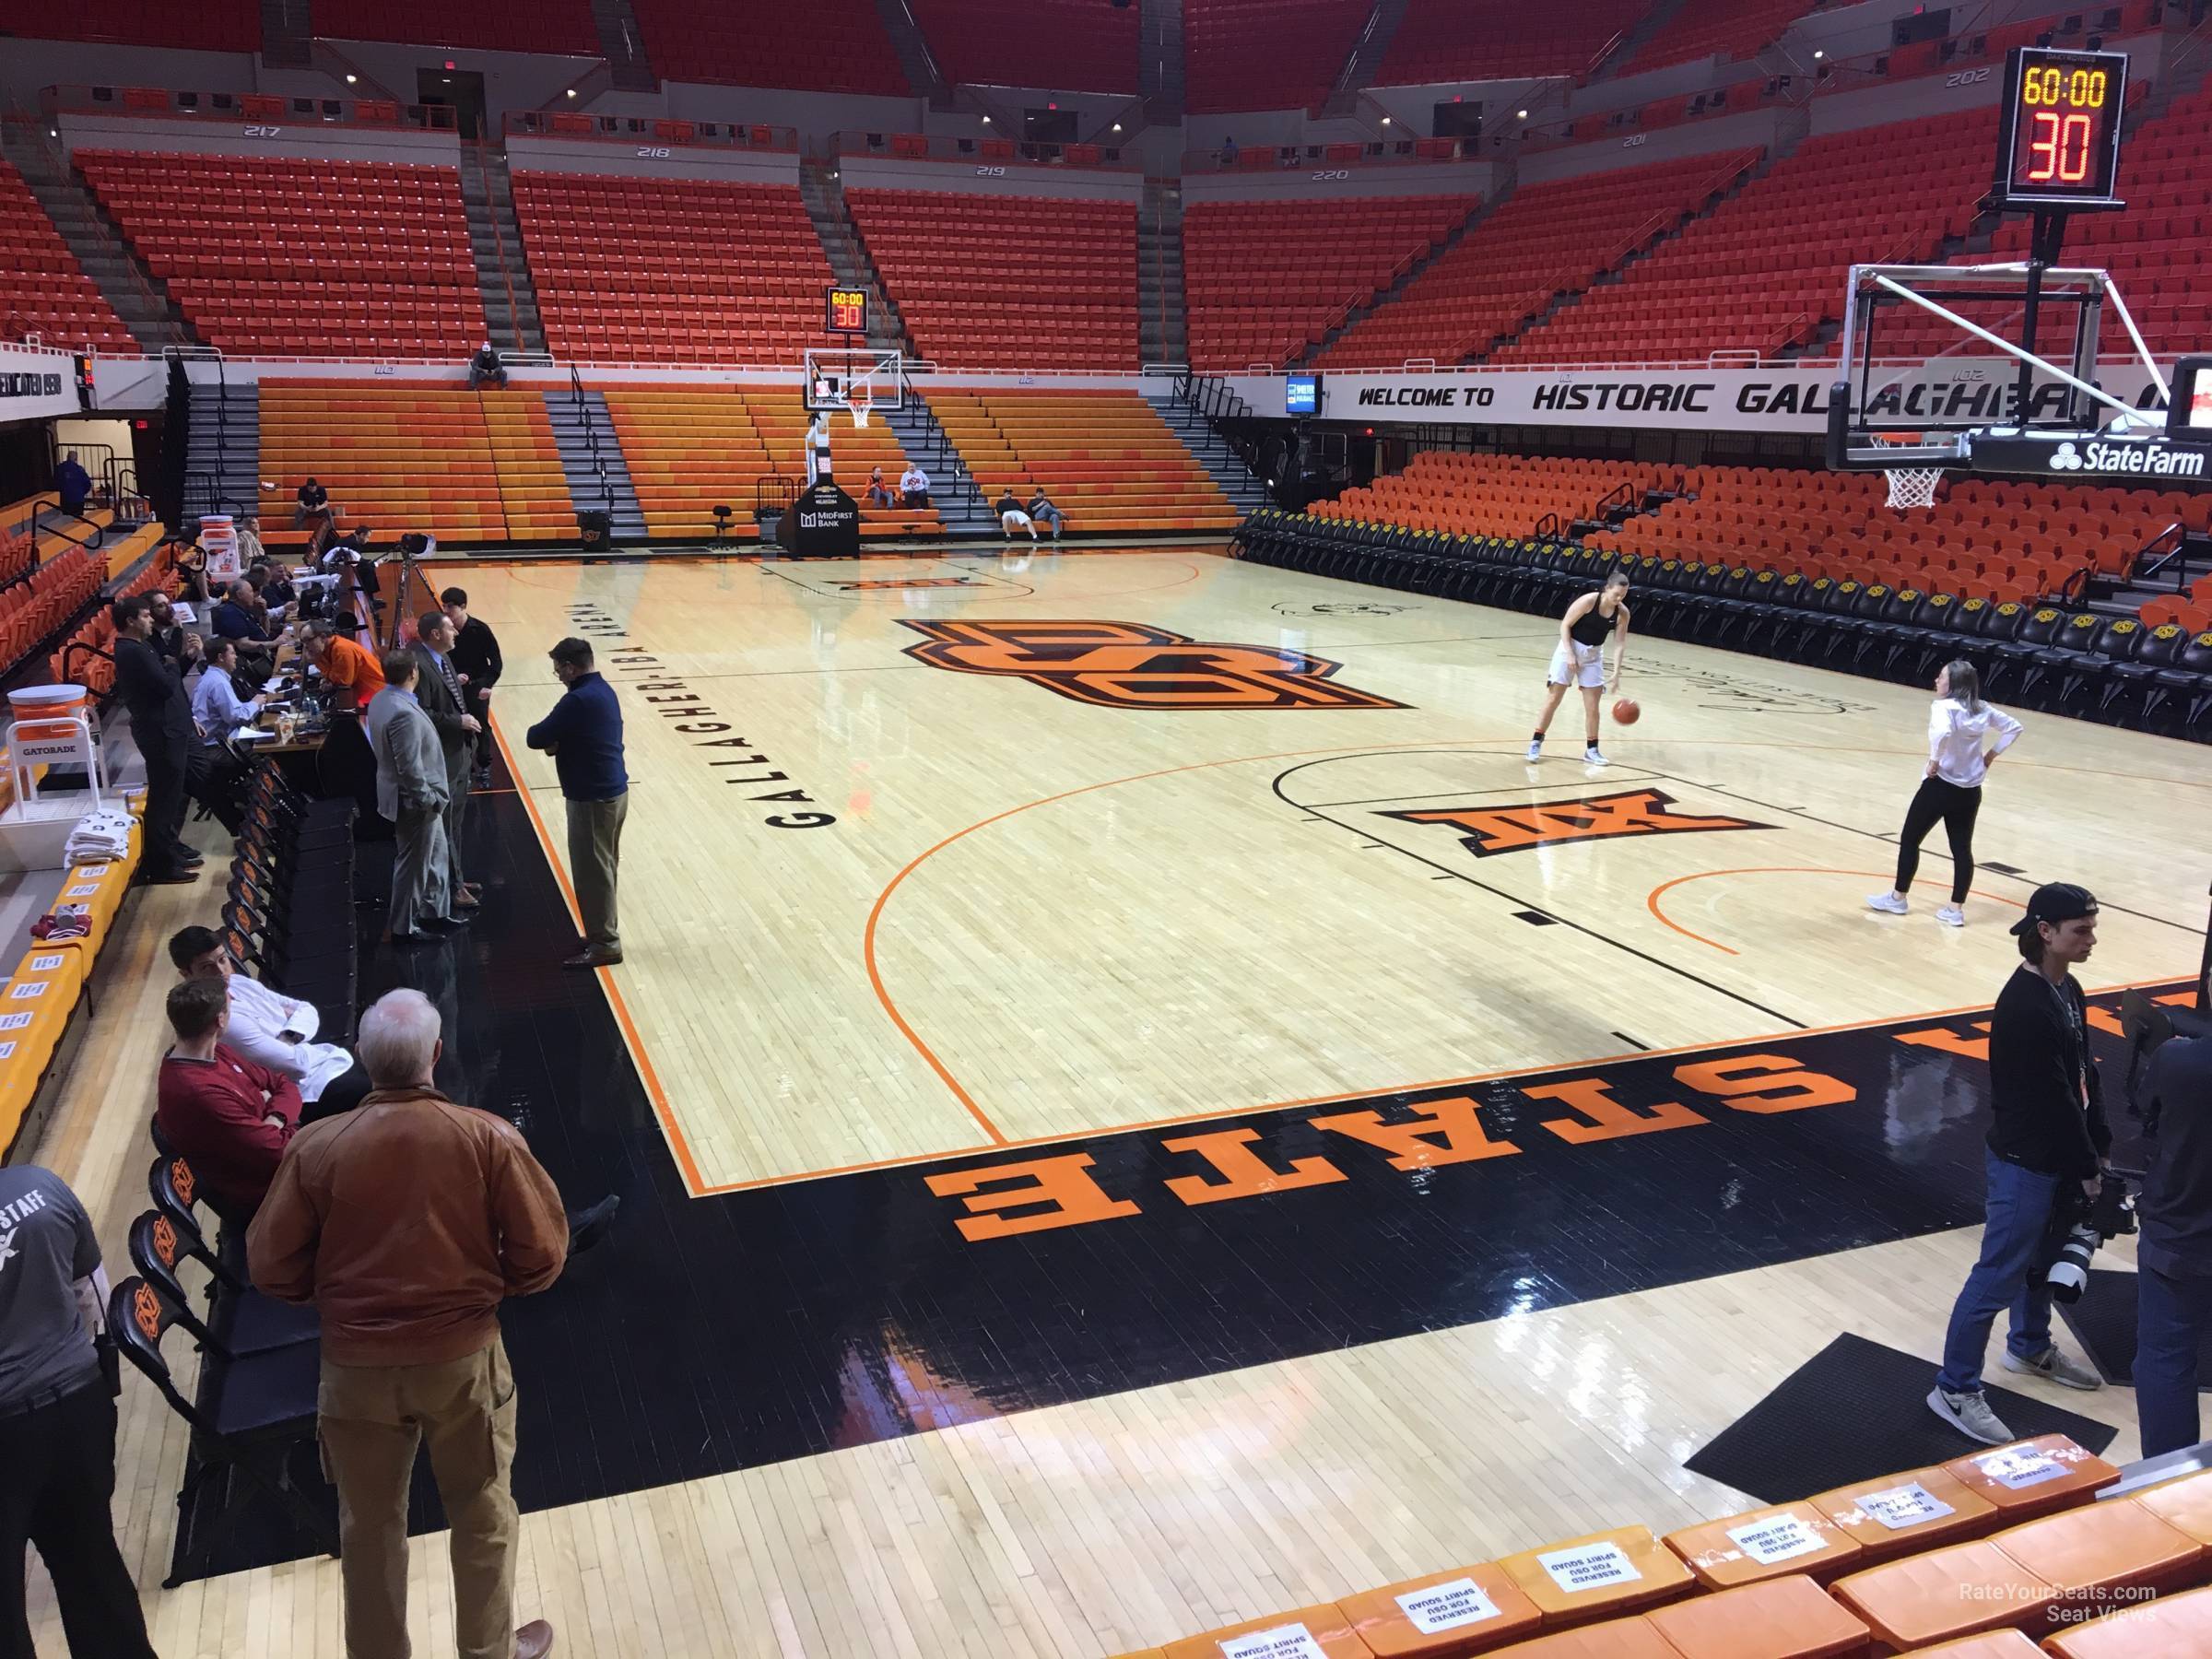 section 106, row 6 seat view  - gallagher-iba arena